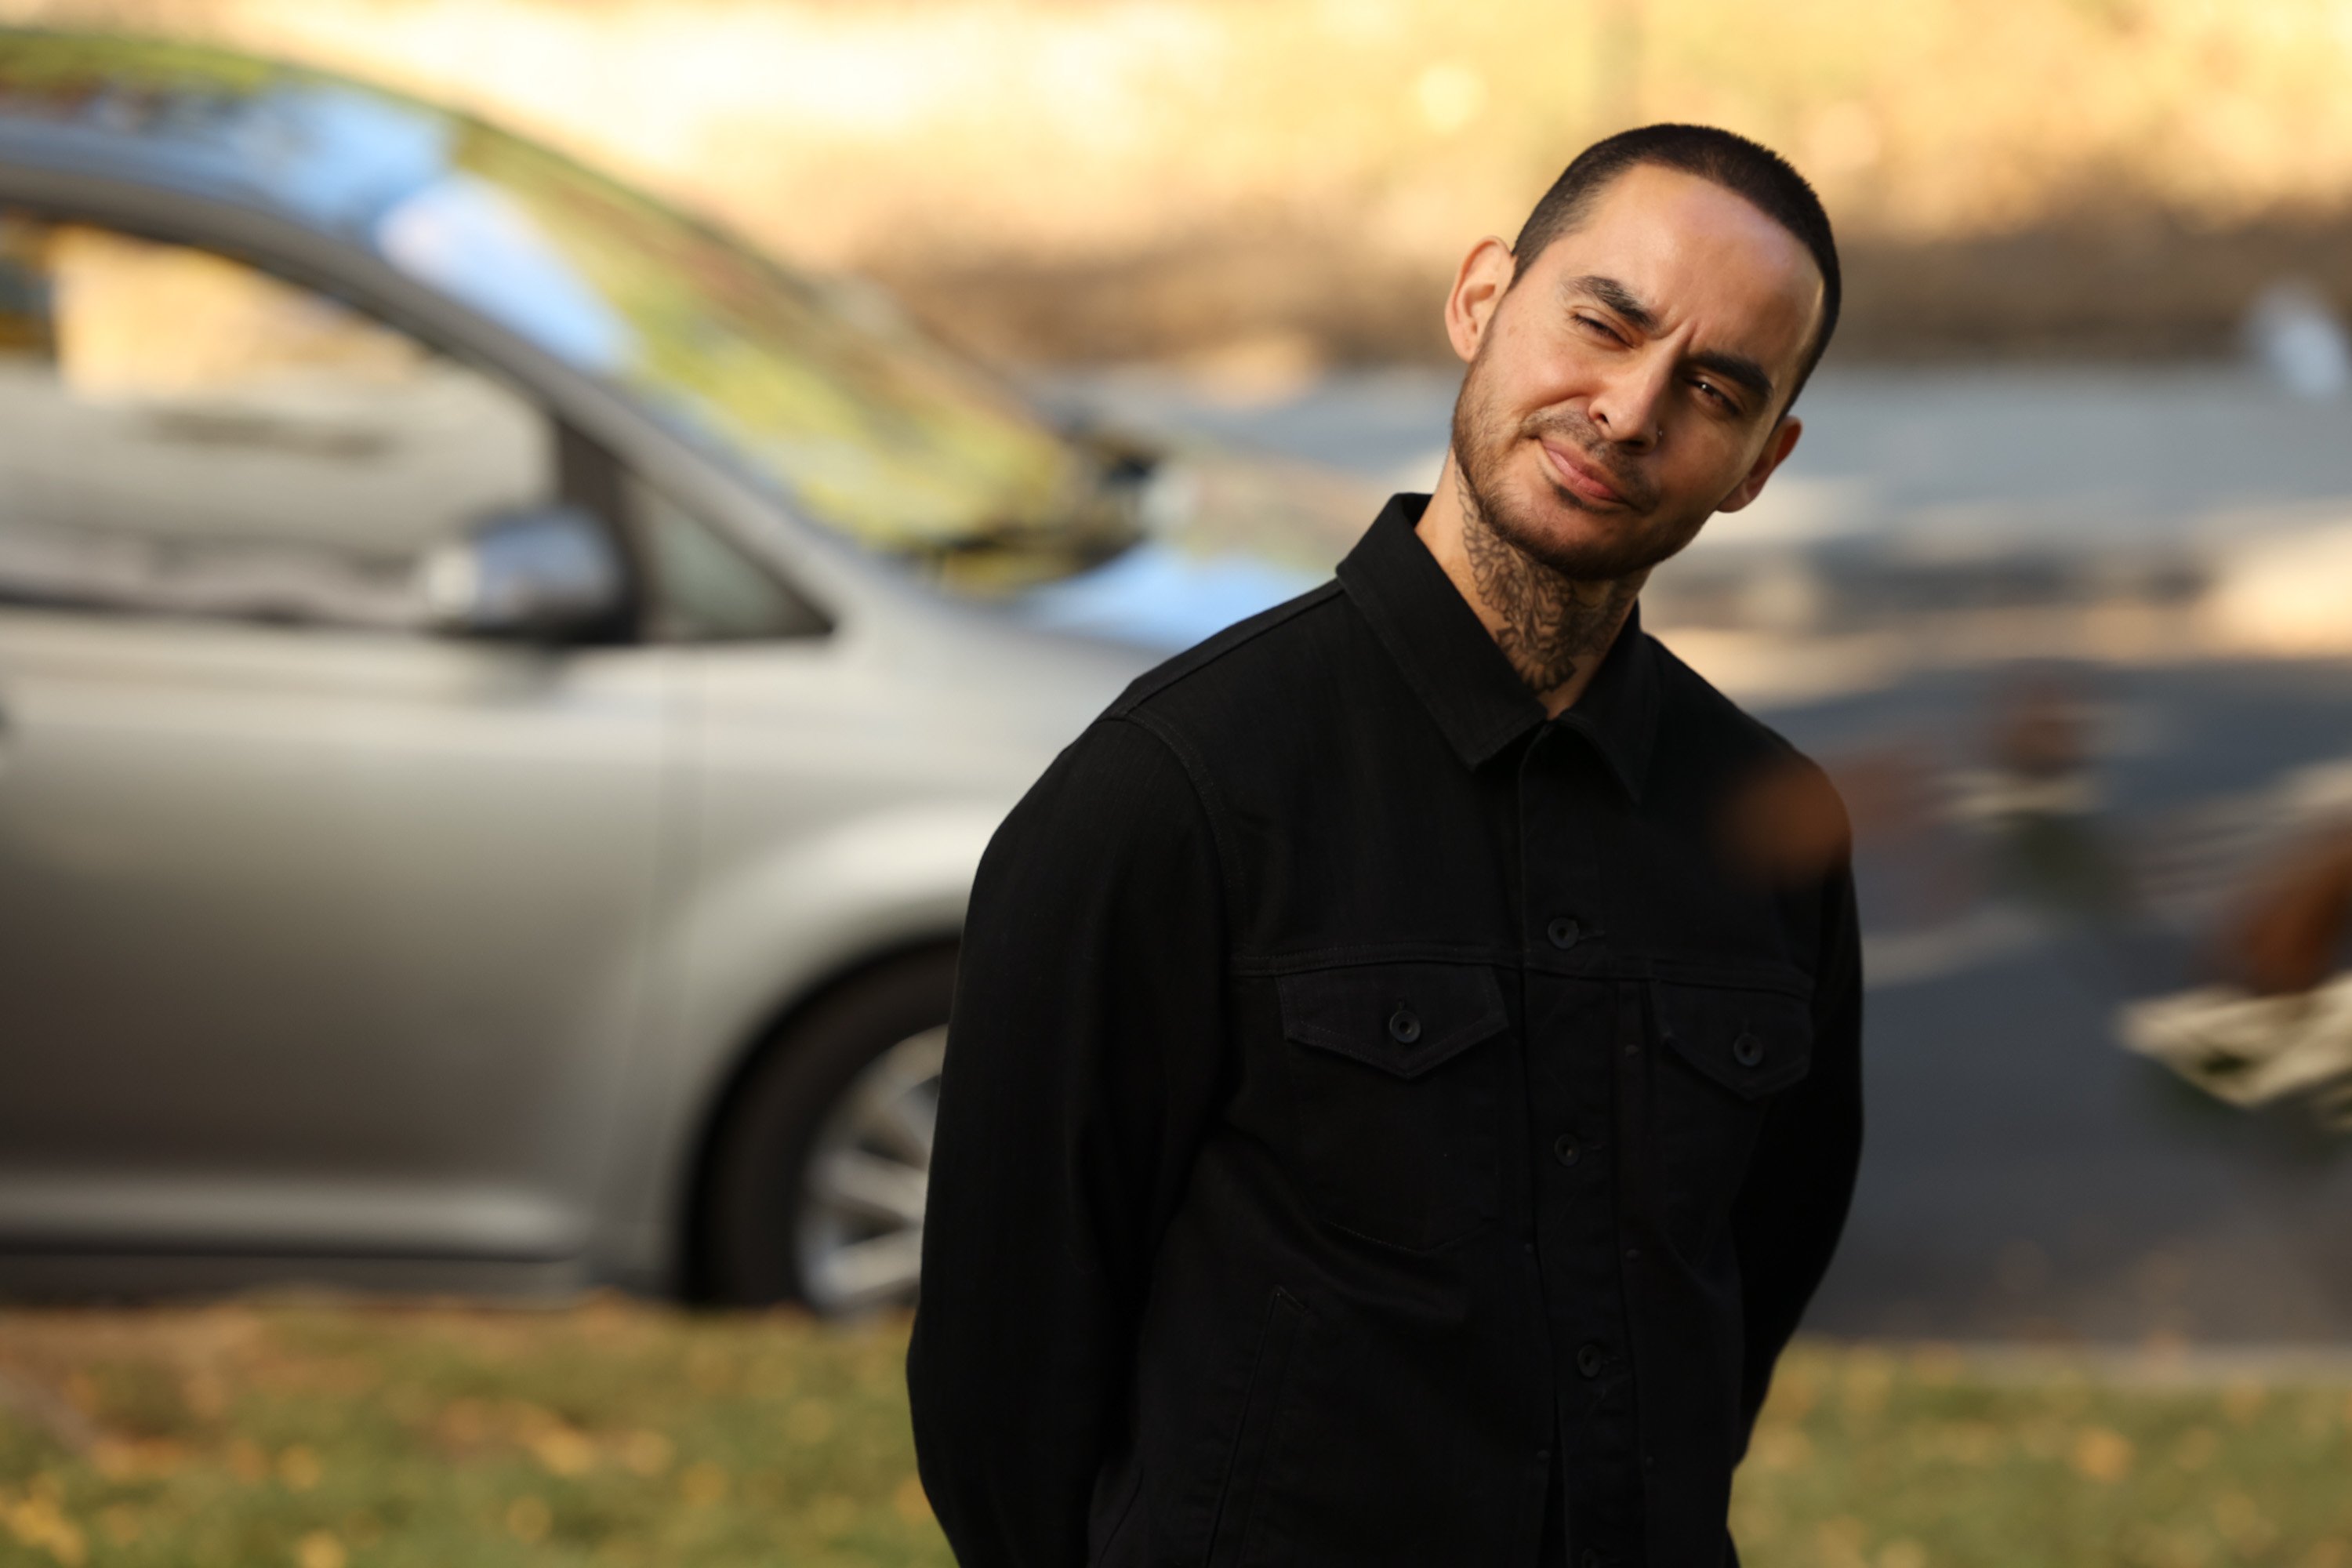 'Good Girls' star Manny Montana as Rio tilting his head and smirking while standing outside.